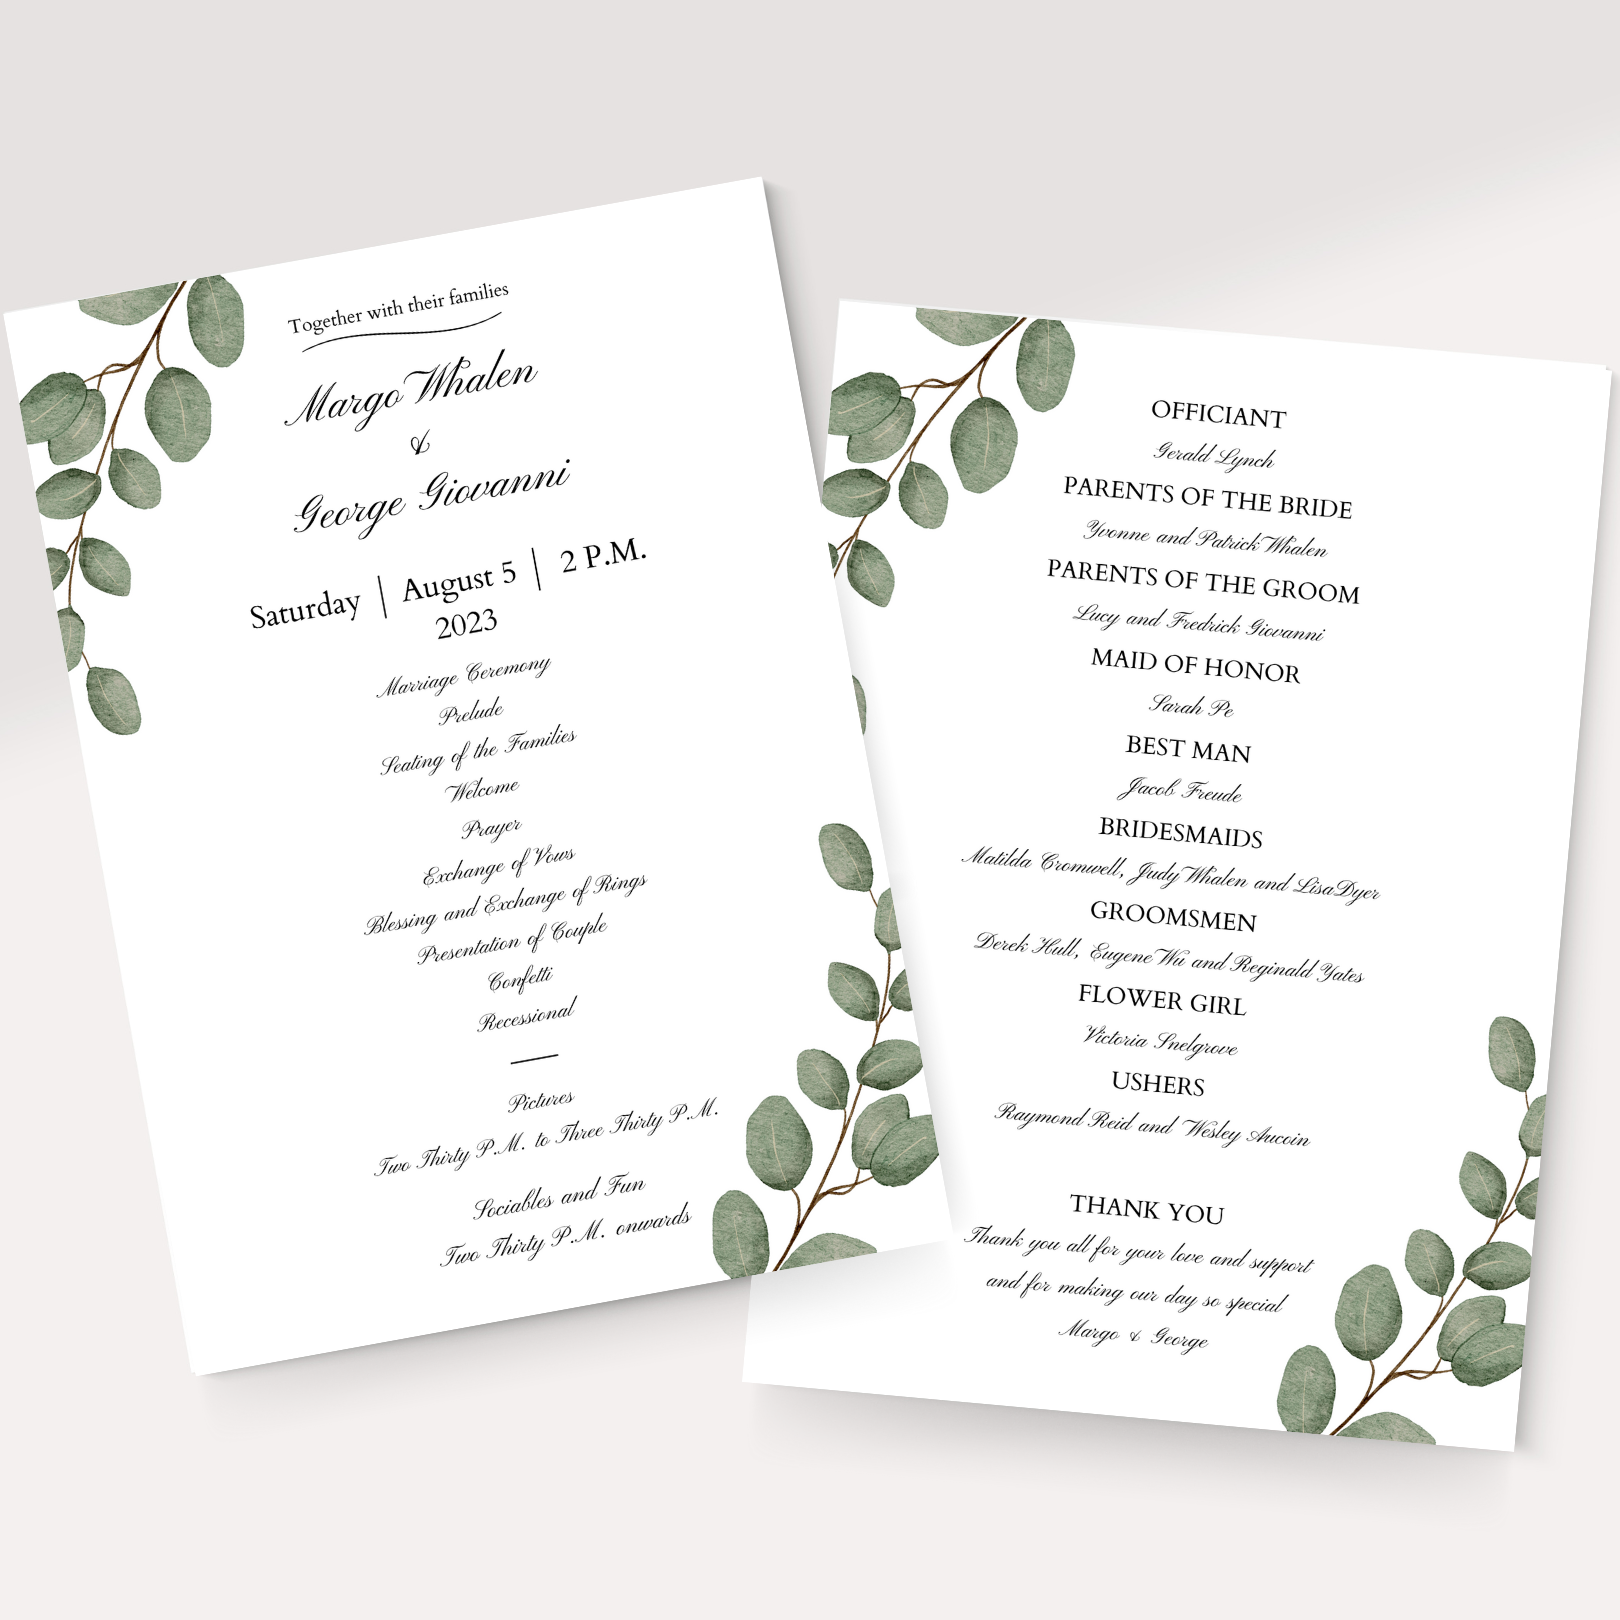 A minimalist, white wedding program with branches of green eucalyptus lays on an off-white background.